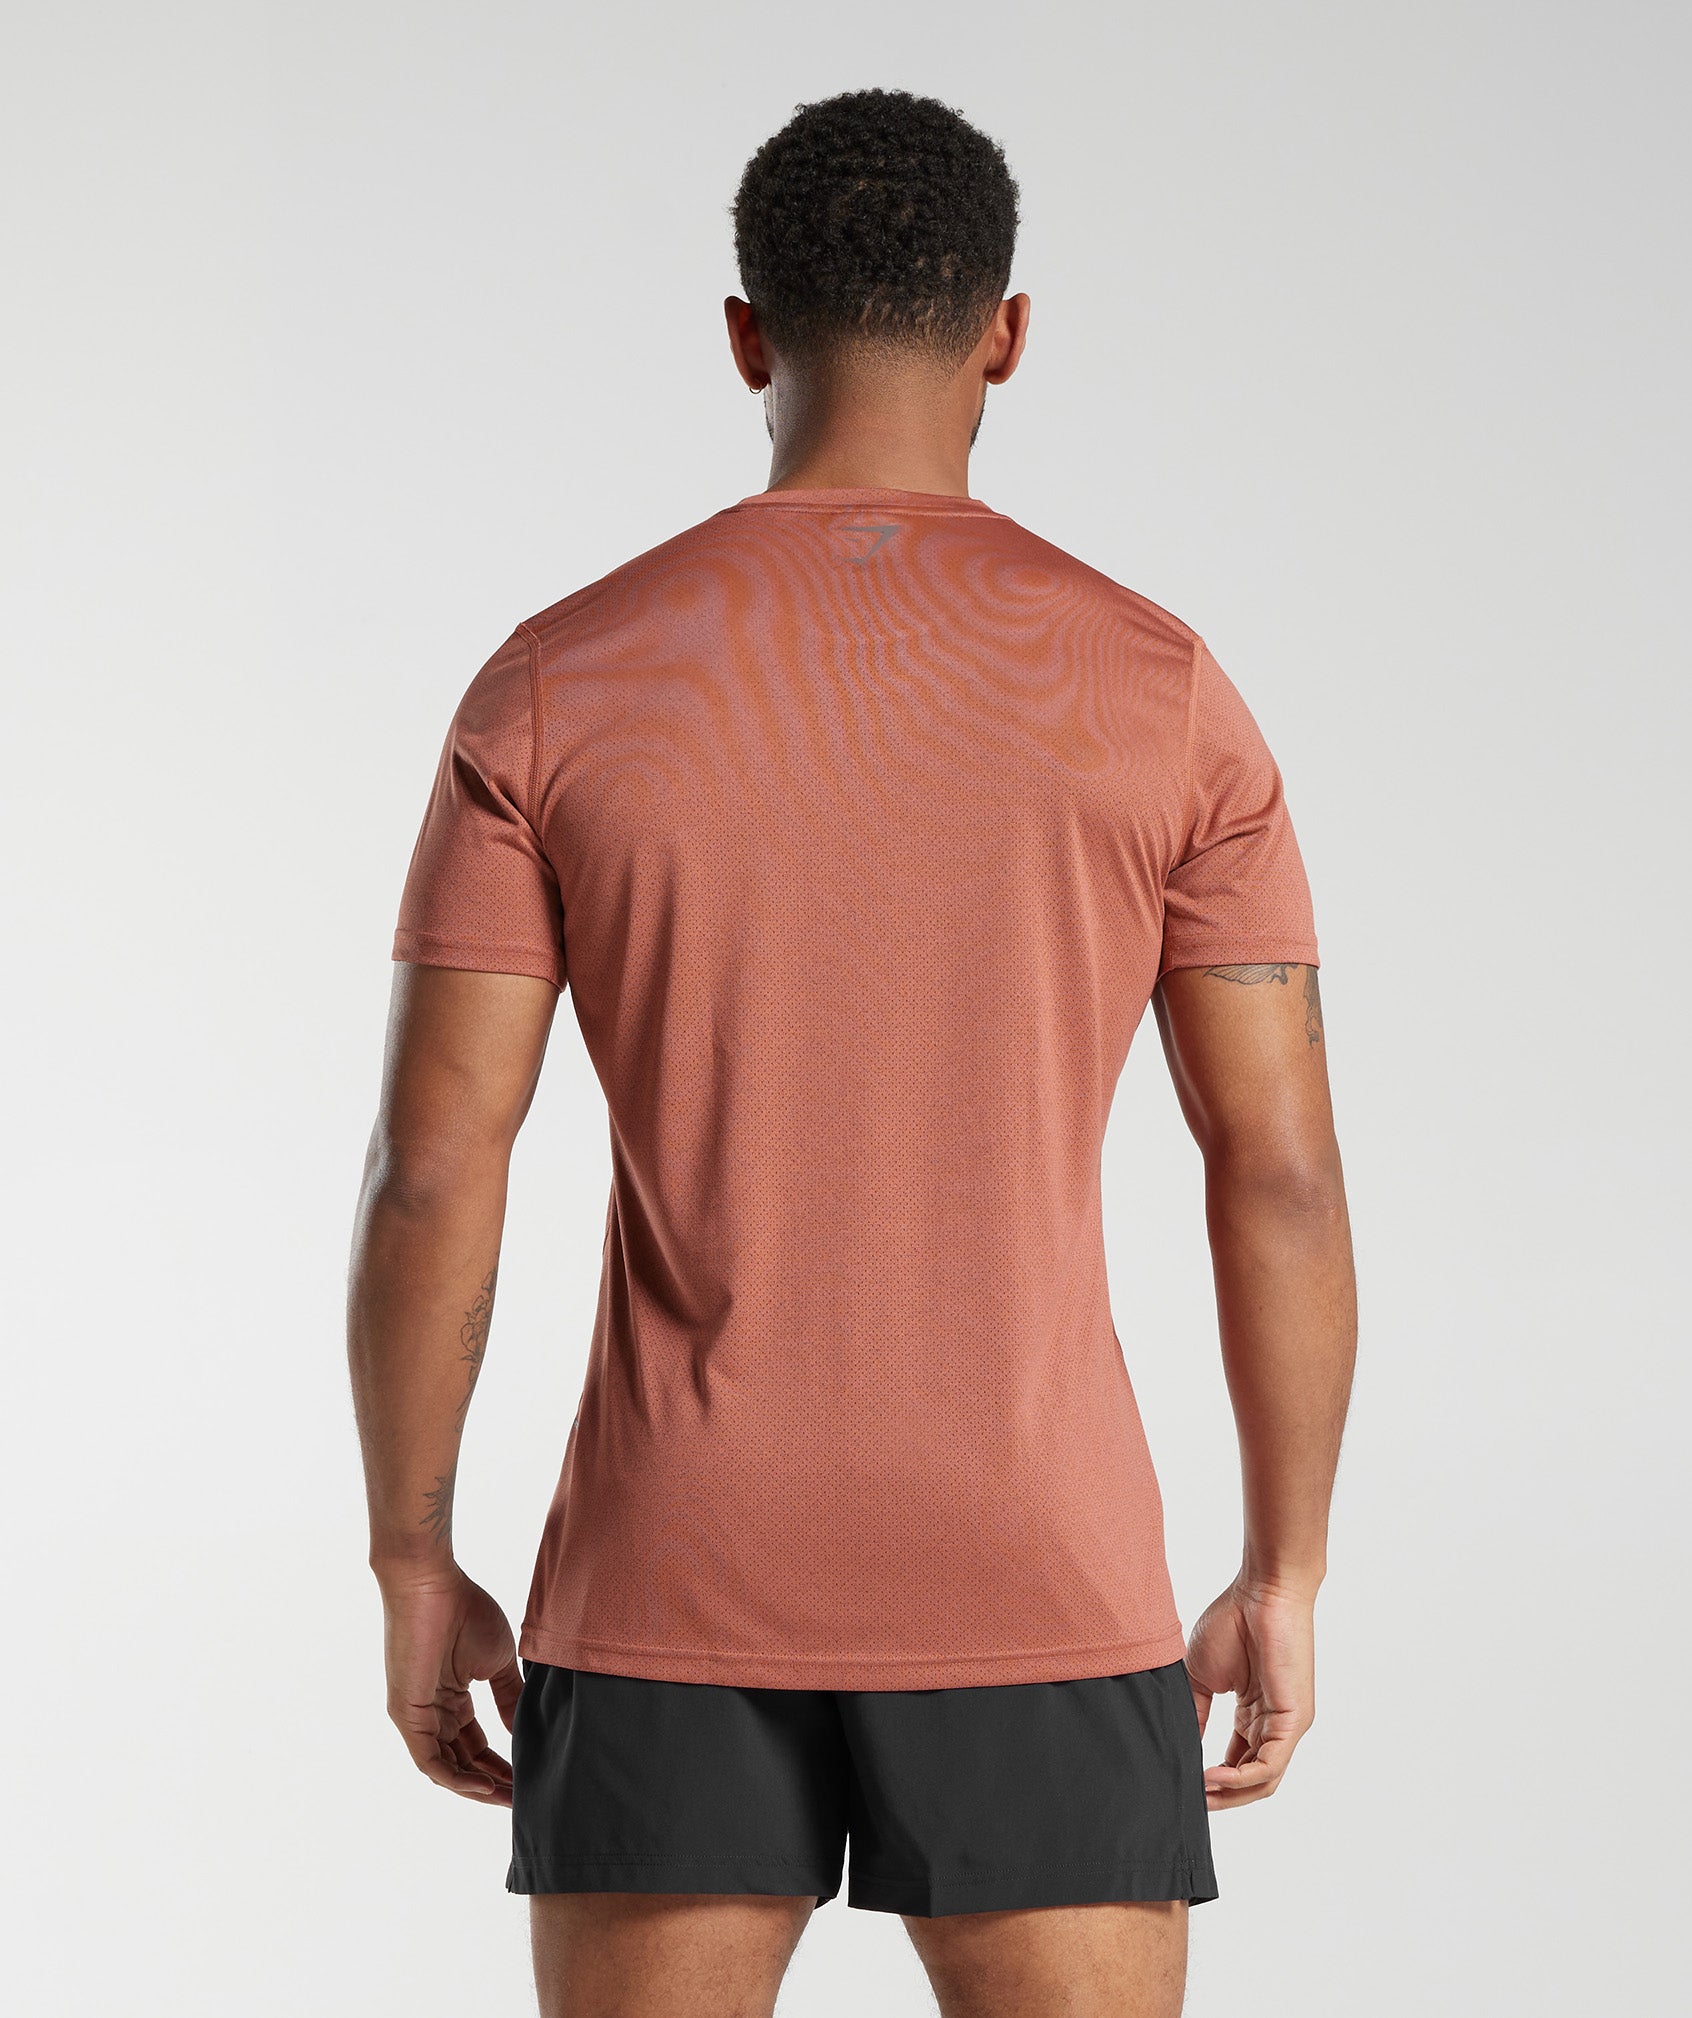 Sport T-Shirt in Persimmon Red/Black Marl